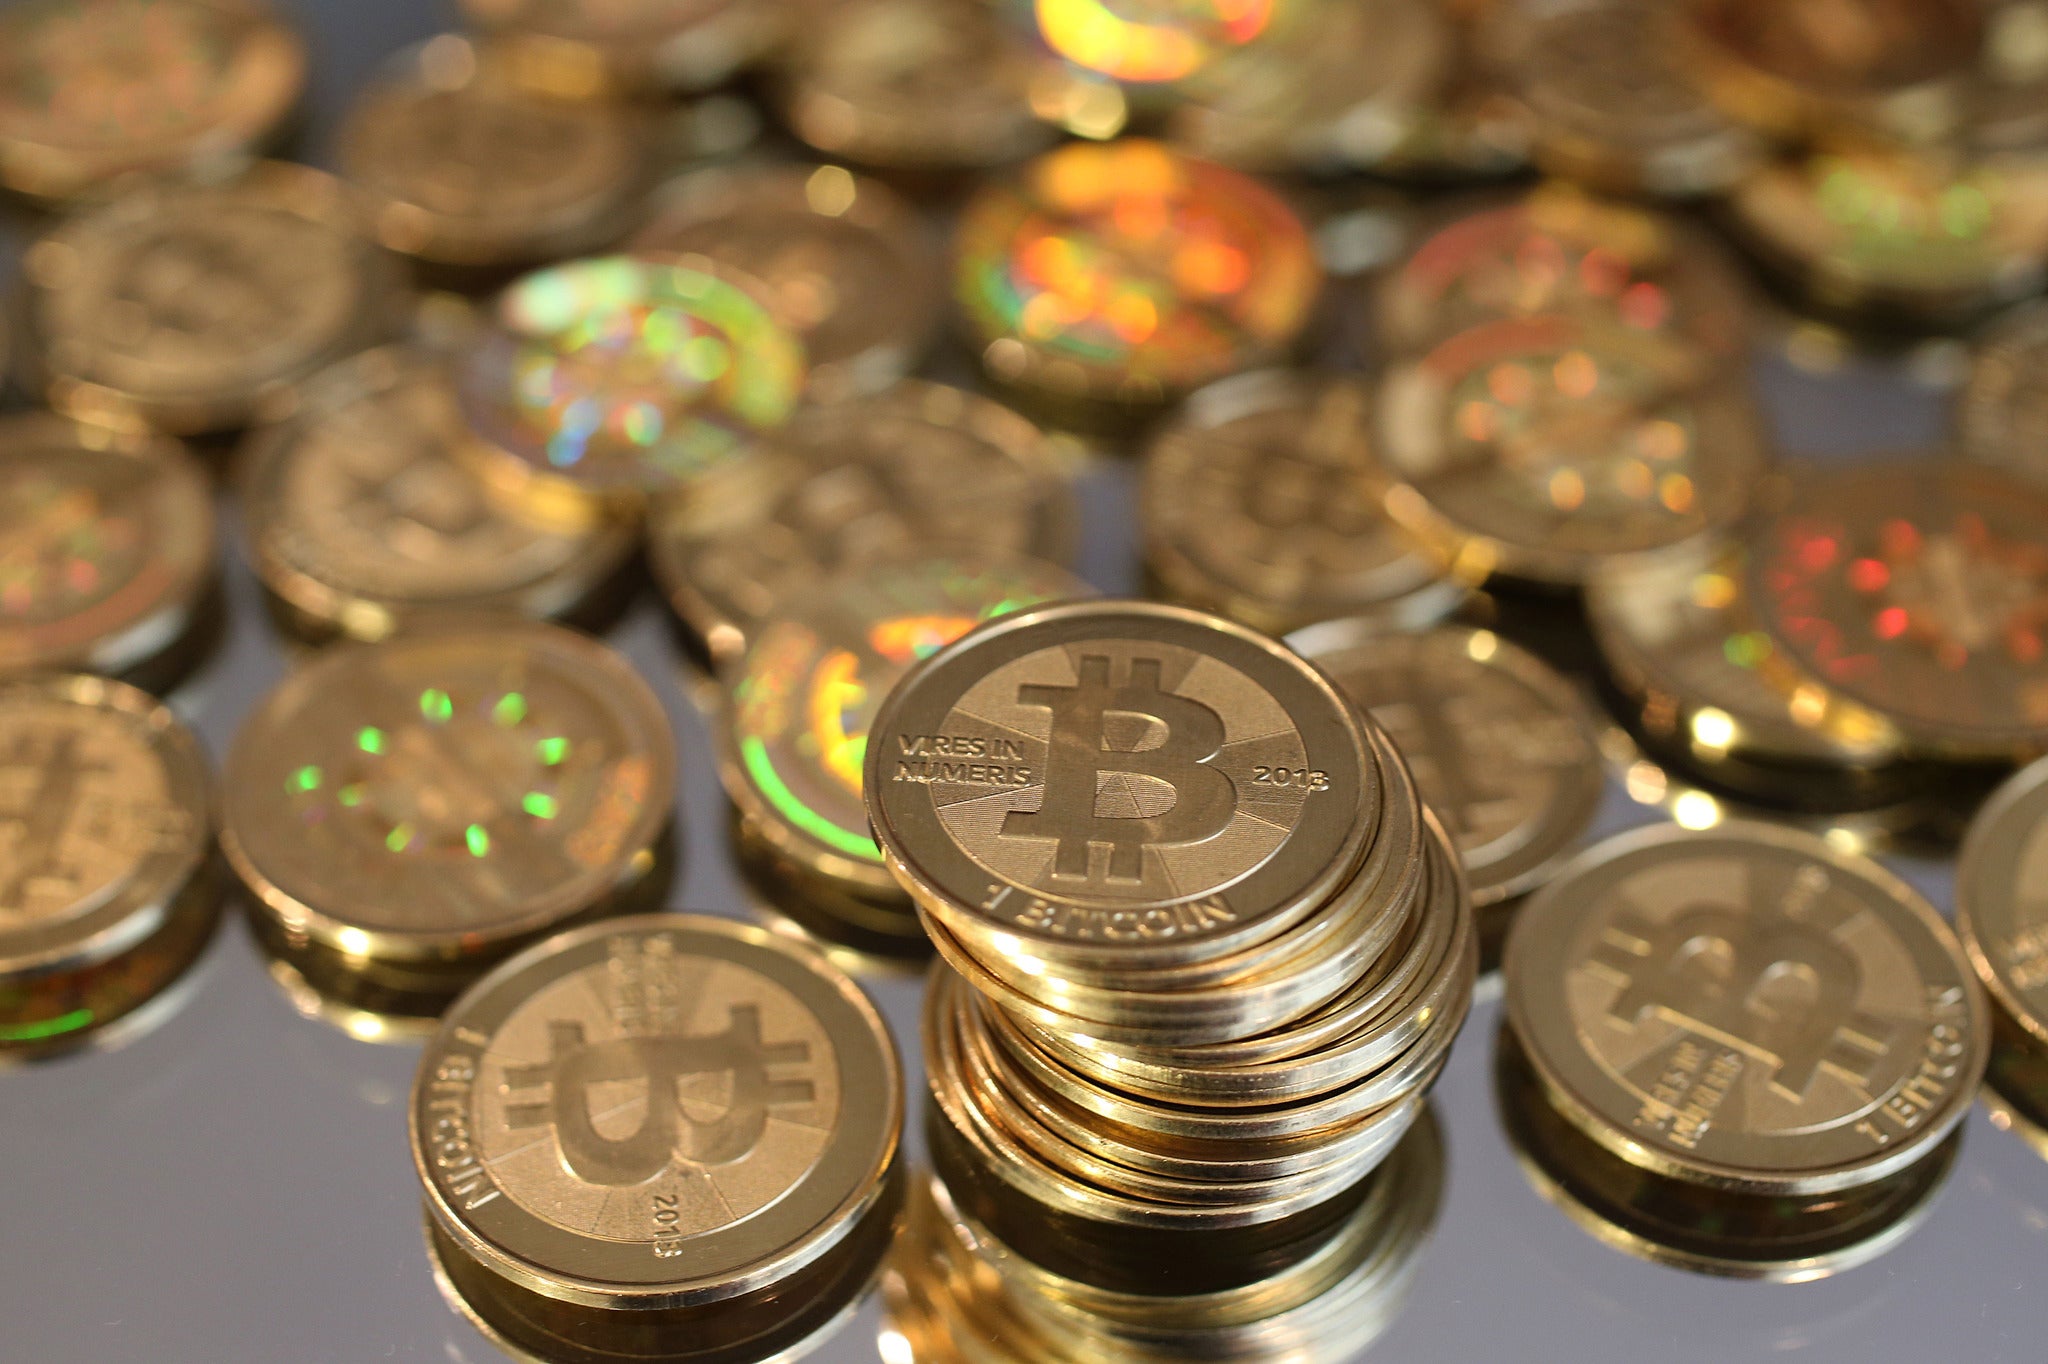 A pile of Bitcoins are shown here after Software engineer Mike Caldwell minted them in his shop on April 26, 2013 in Sandy, Utah. Bitcoin is an experimental digital currency used over the Internet that is gaining in popularity worldwide. (Photo by George 